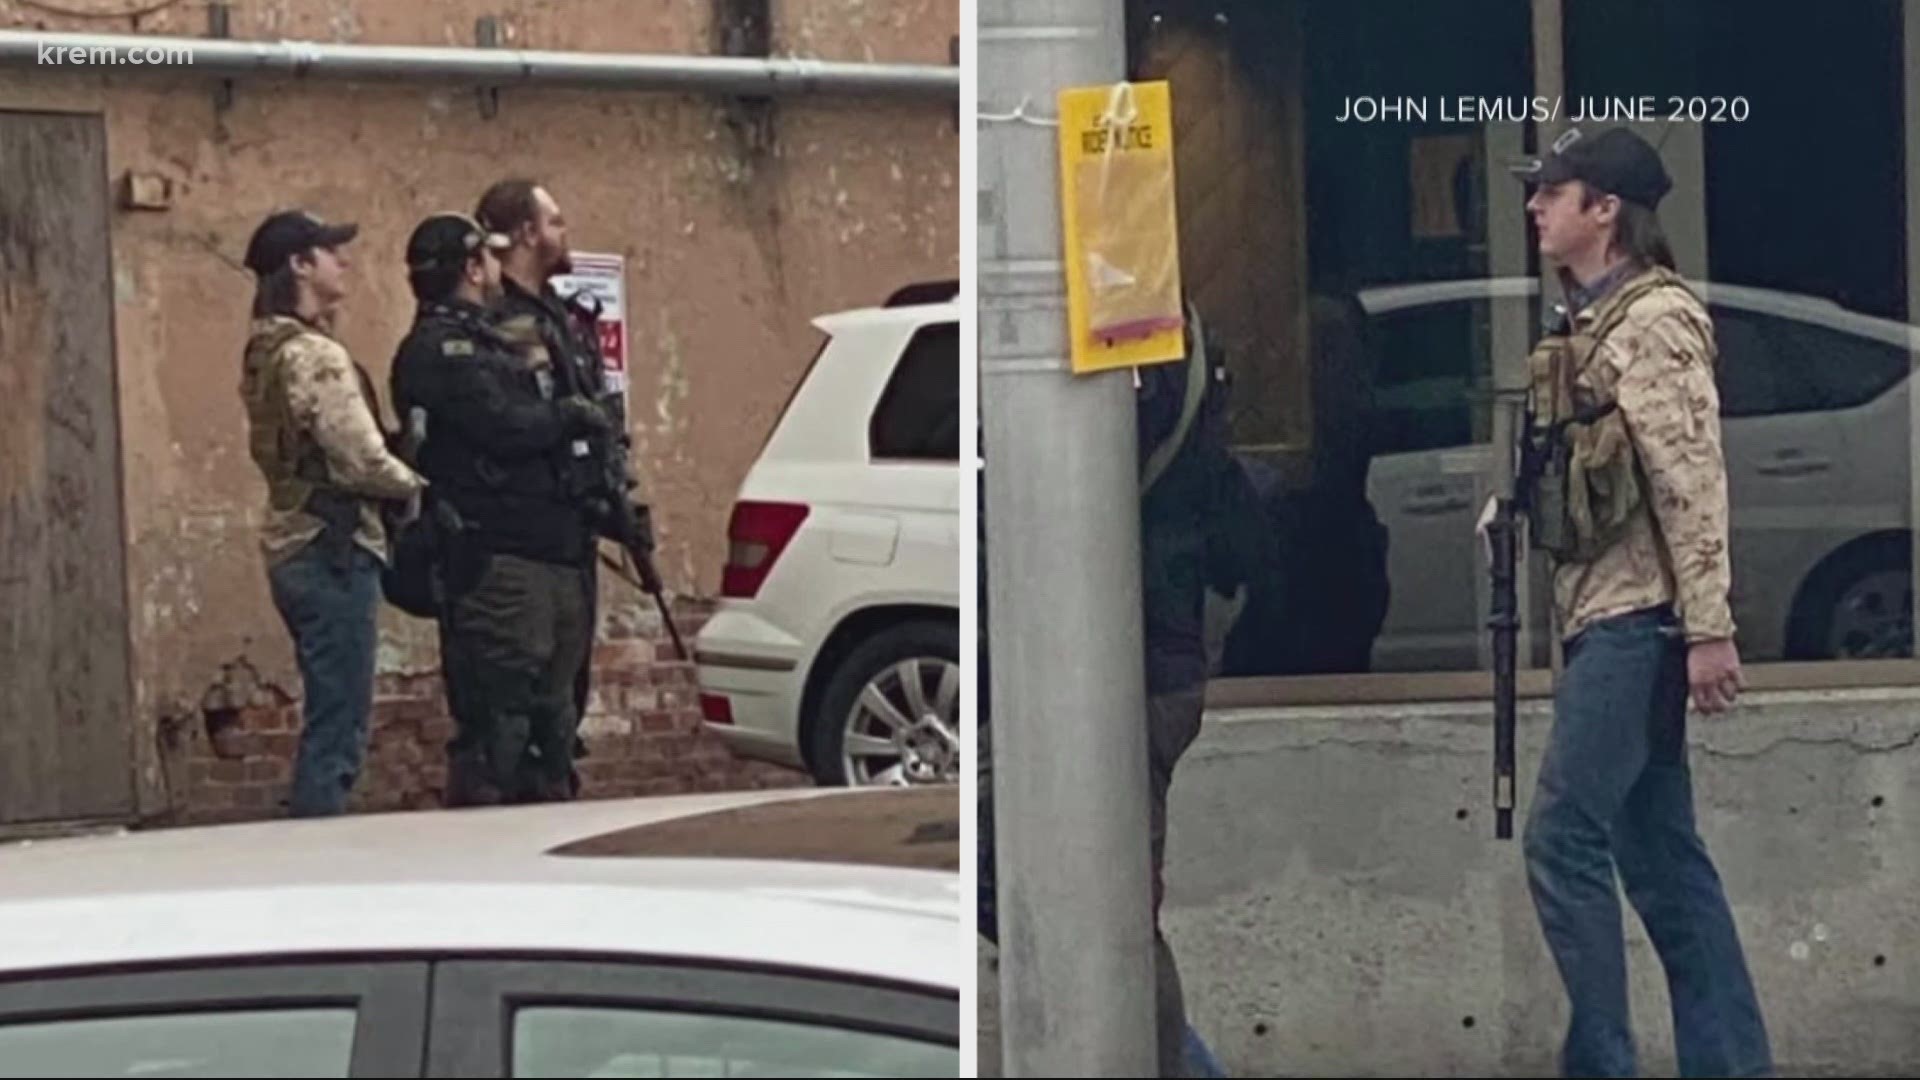 Amid heightened concerns about political violence, the Spokane City Council adopted a new code making certain armed activity a city misdemeanor.